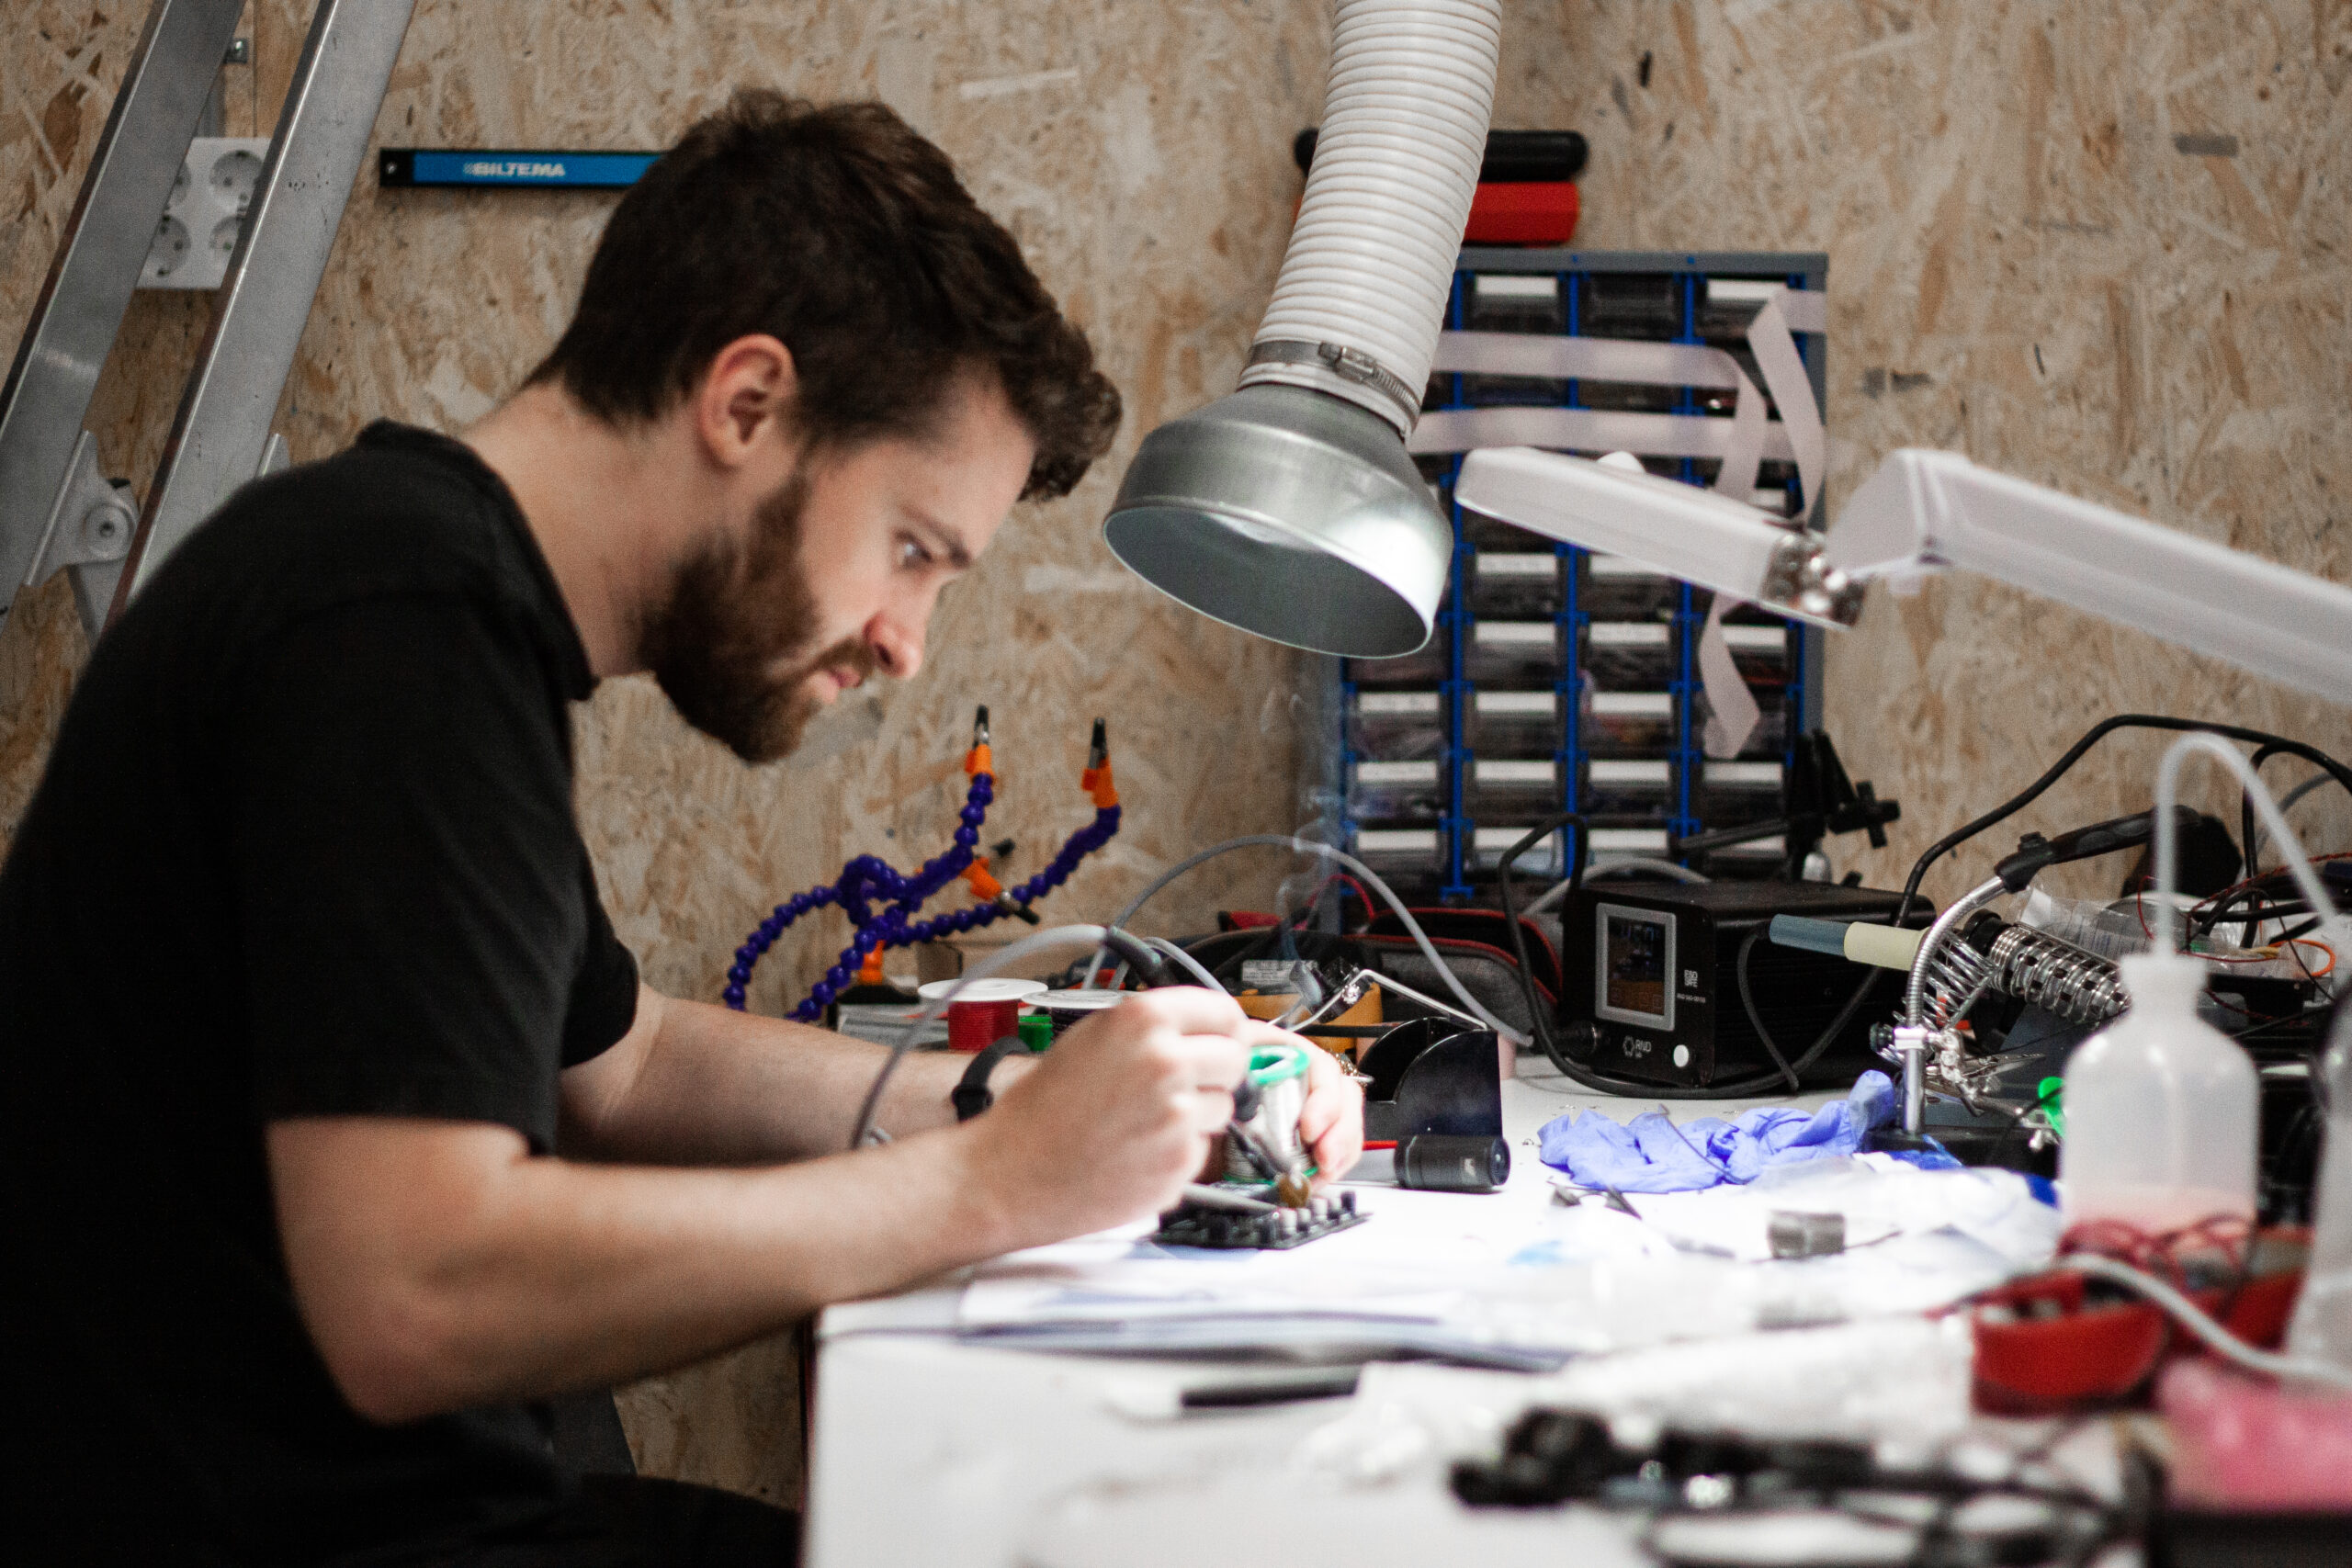 A person working with electronics at oim